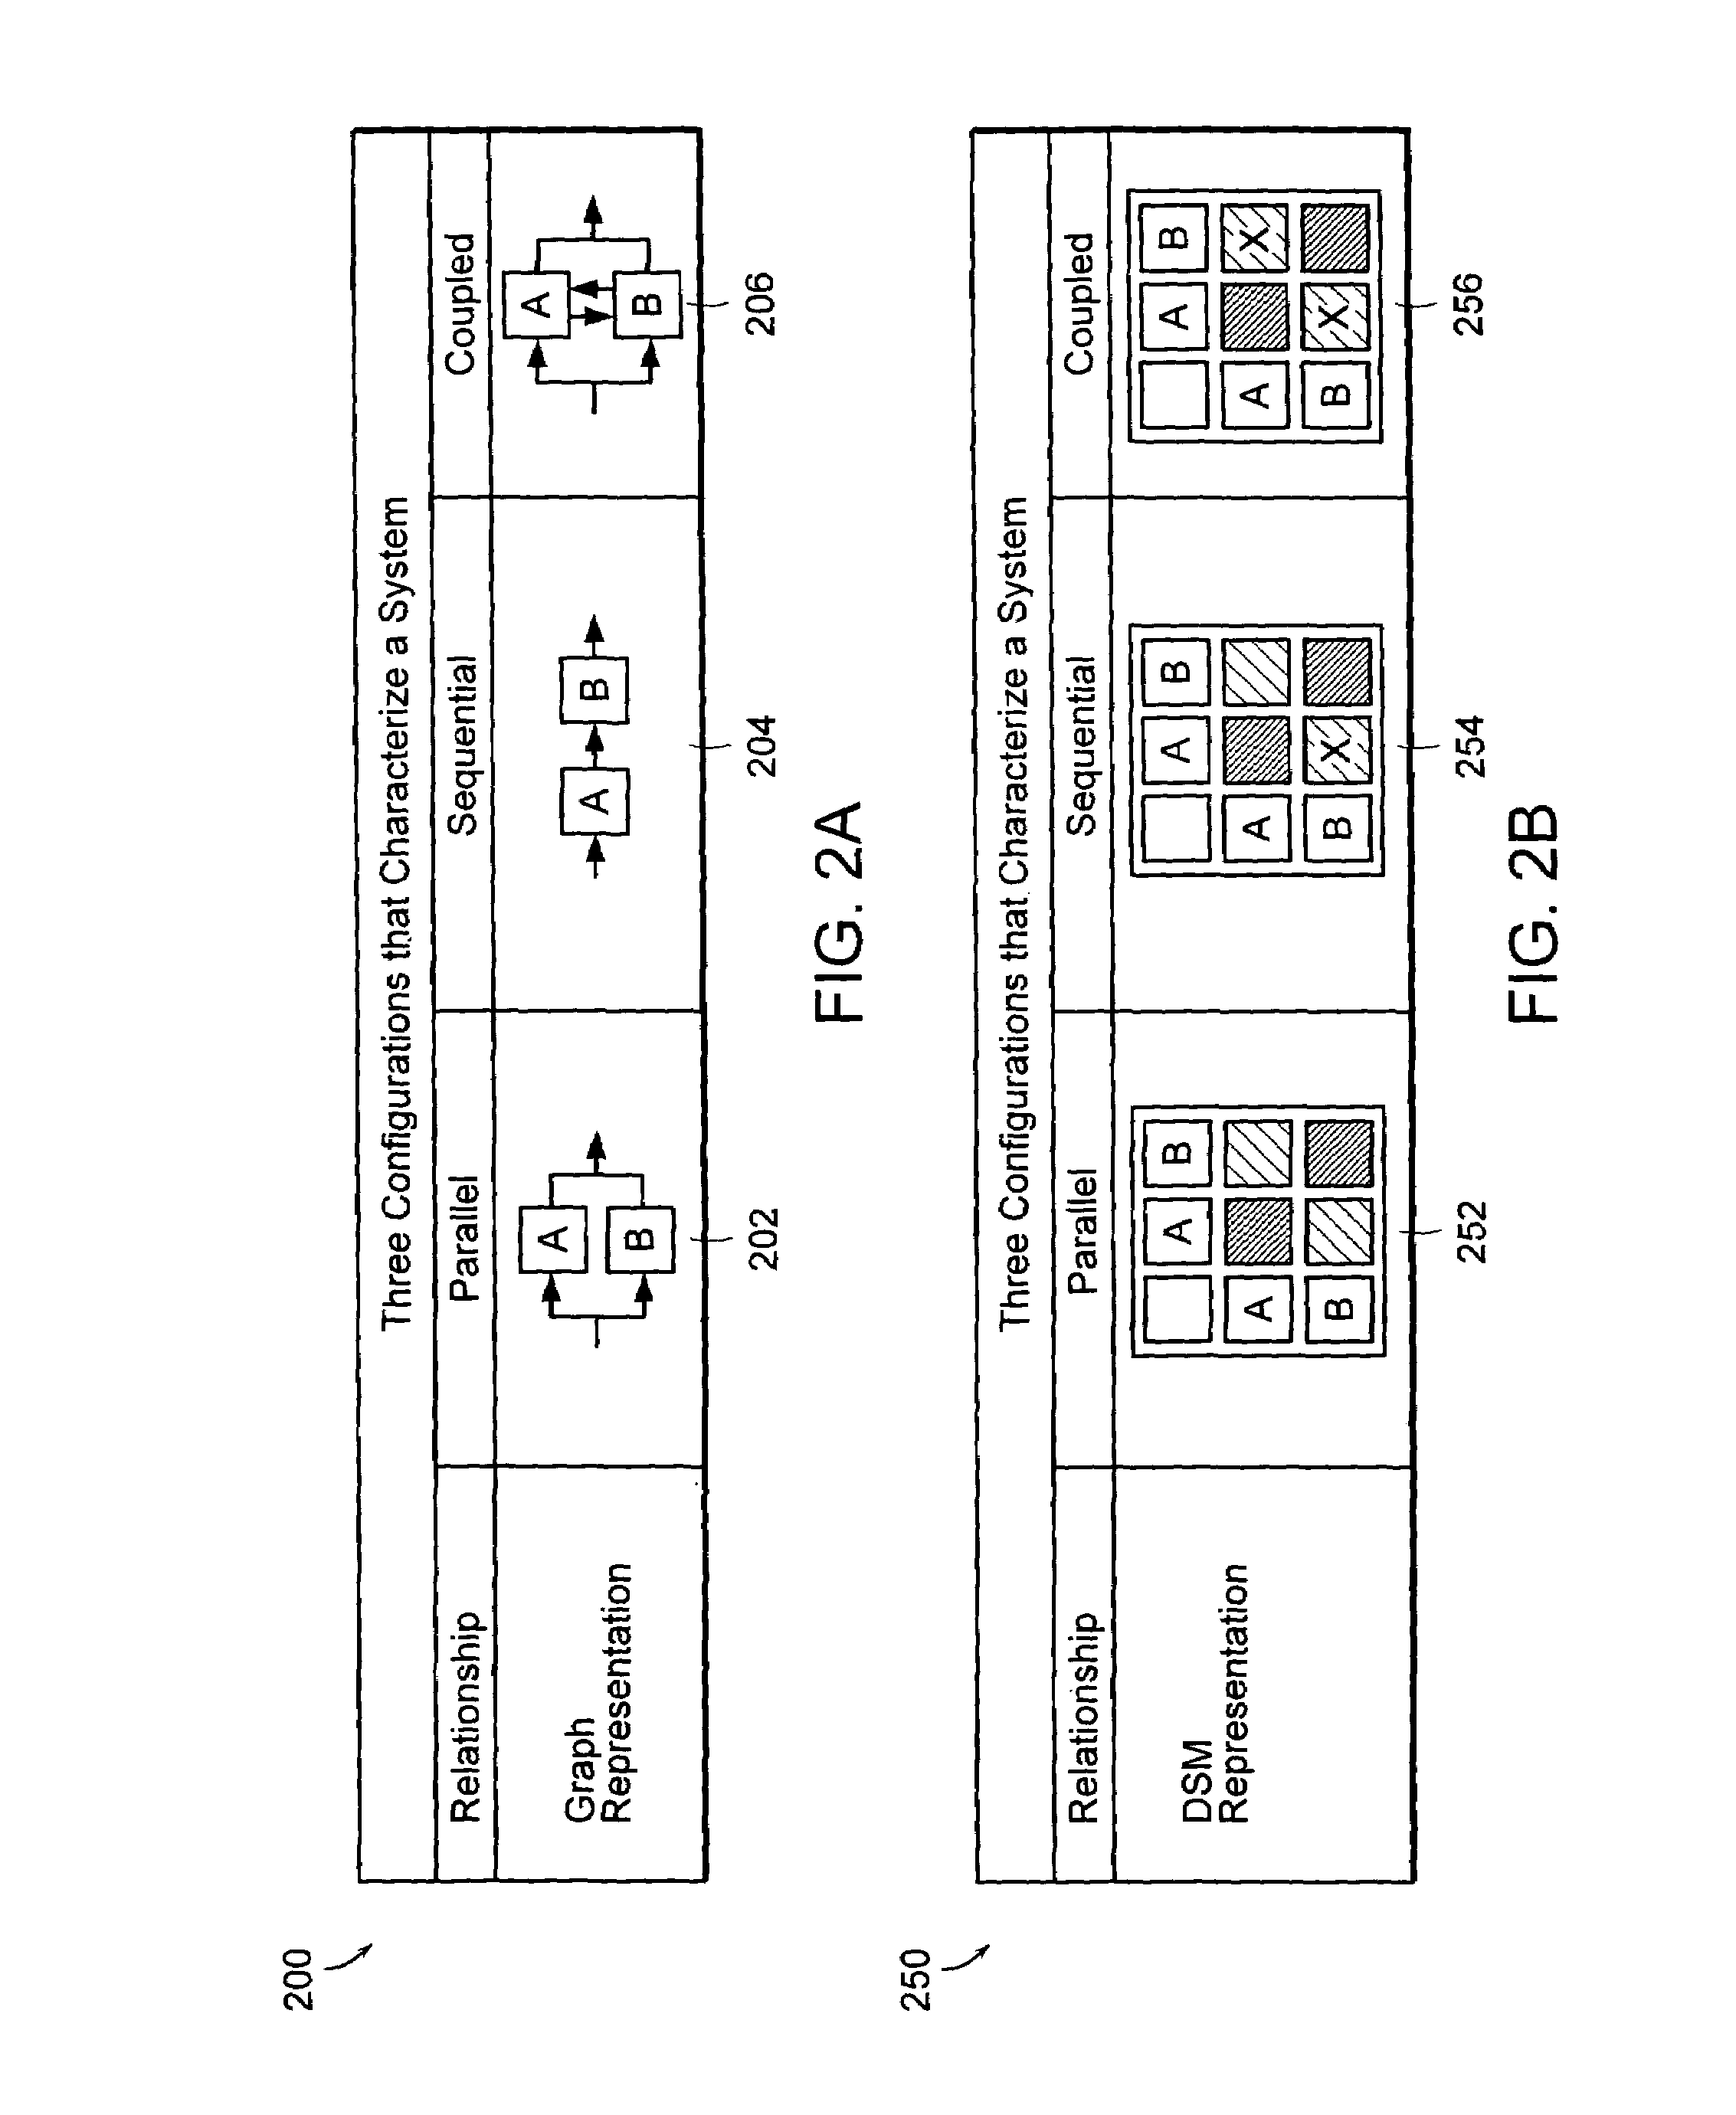 Apparatus and method for managing design of a software system using dependency structure